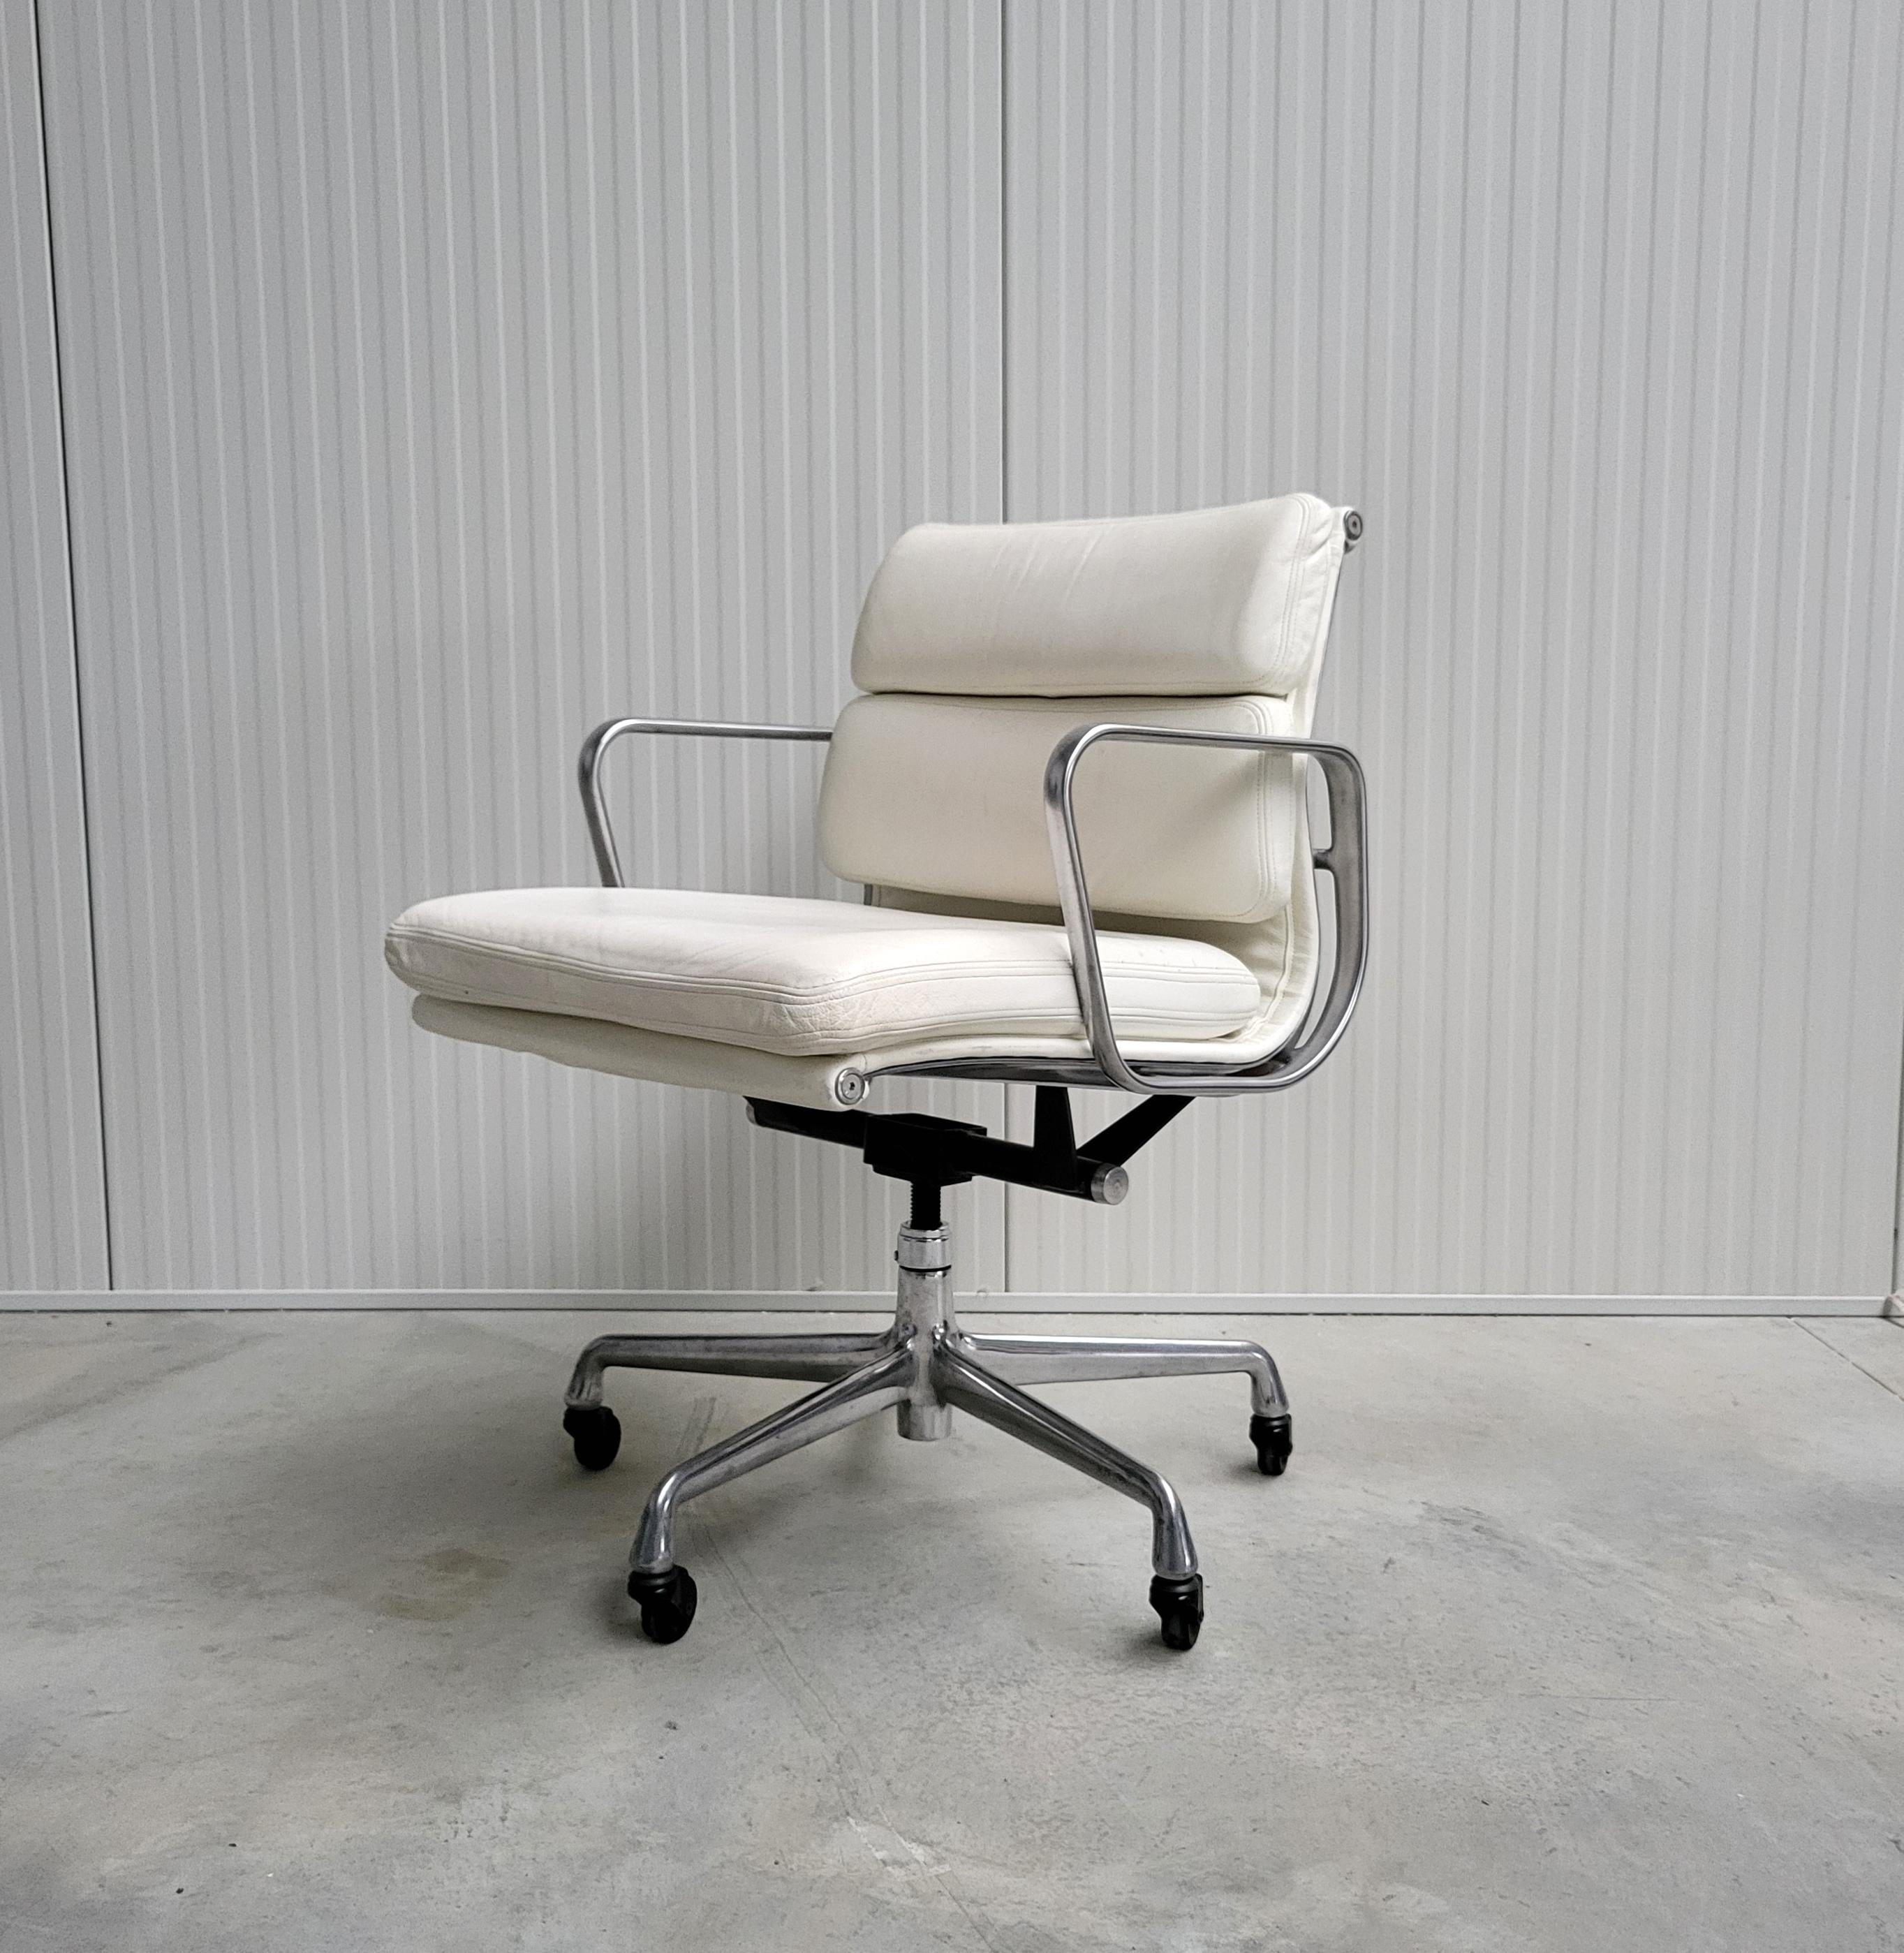 Very nice soft pad office chair model EA335 produced by Herman Miller. 
The chair features a polished aluminium frame and was made in the early 2000s.

The chair is height adjustable and has a tilt mechanism.

It has a wonderful white leather